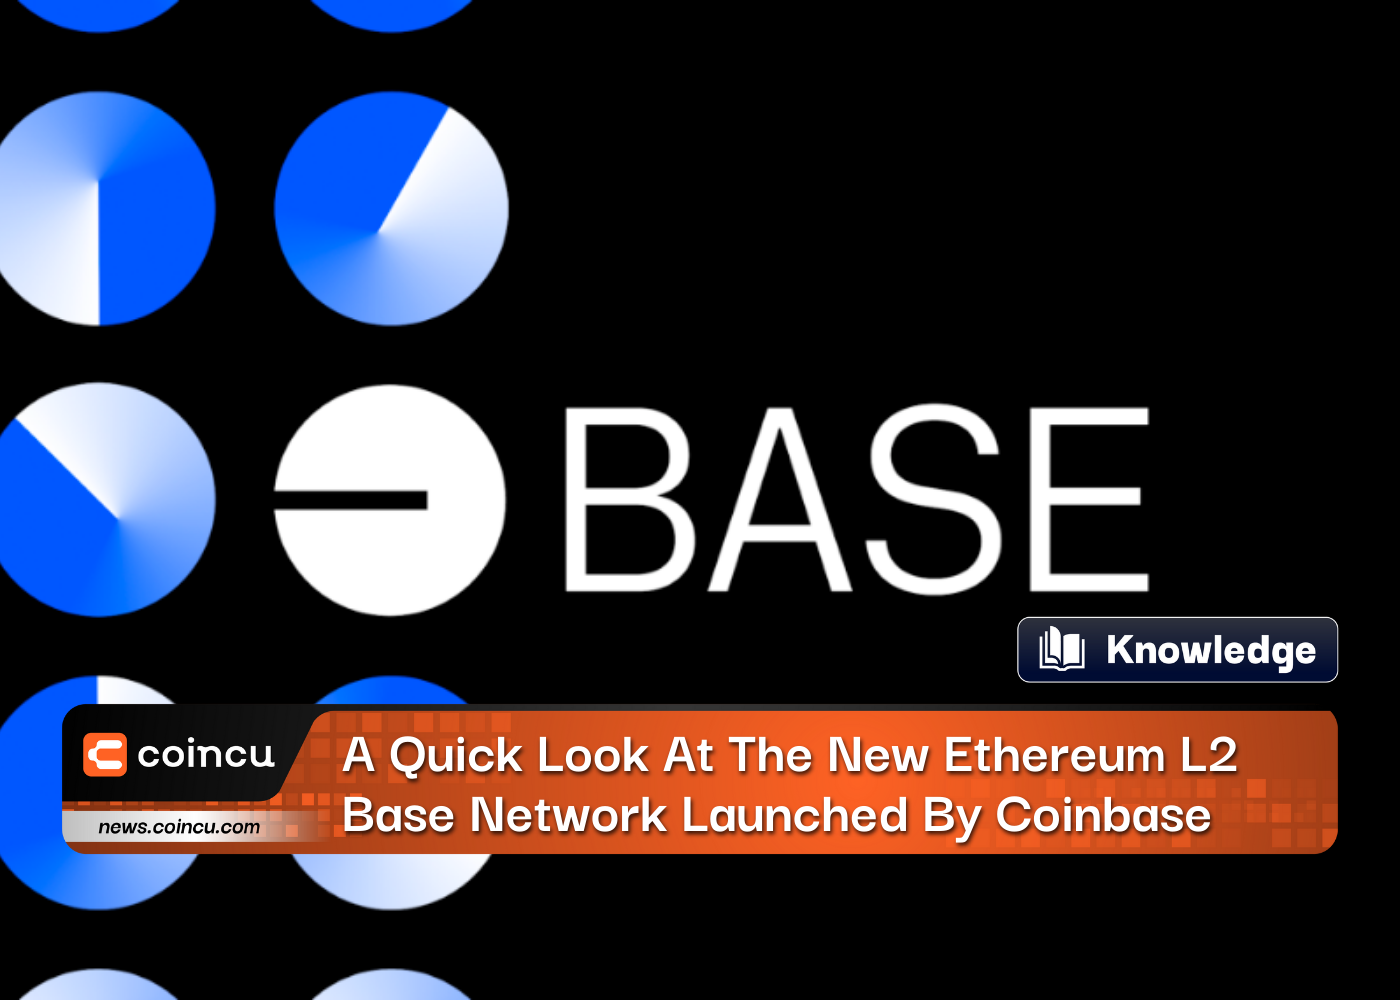 A Quick Look At The New Ethereum L2 Base Network Launched By Coinbase